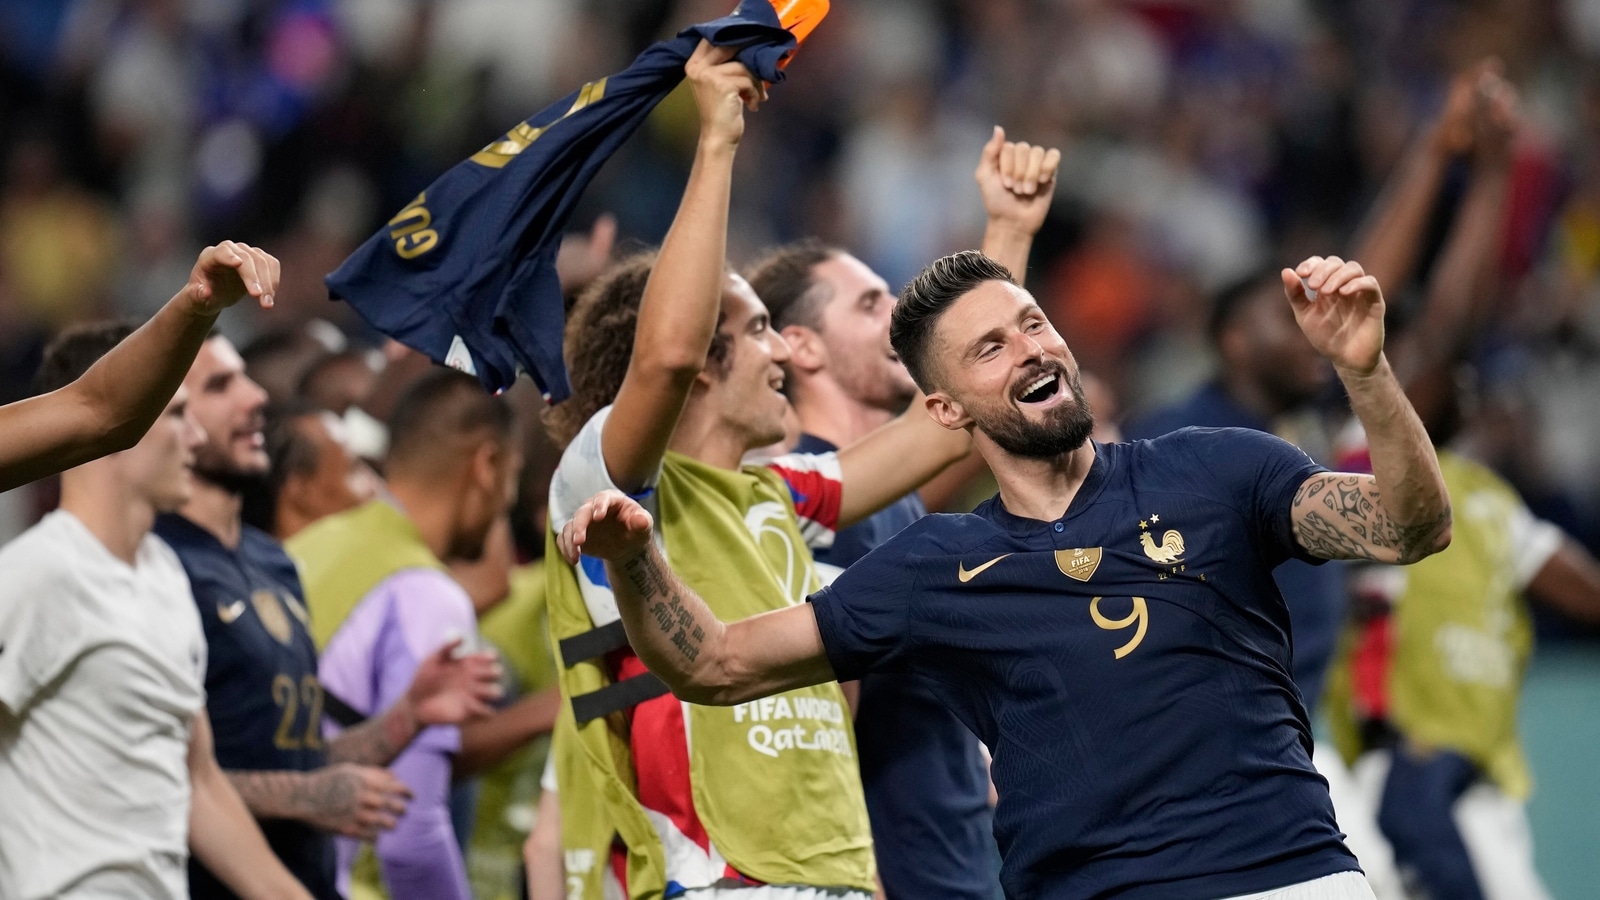 FIFA World Cup 2022: Oliver Giroud equals scoring record as France cruise past Australia 4-1 in opener